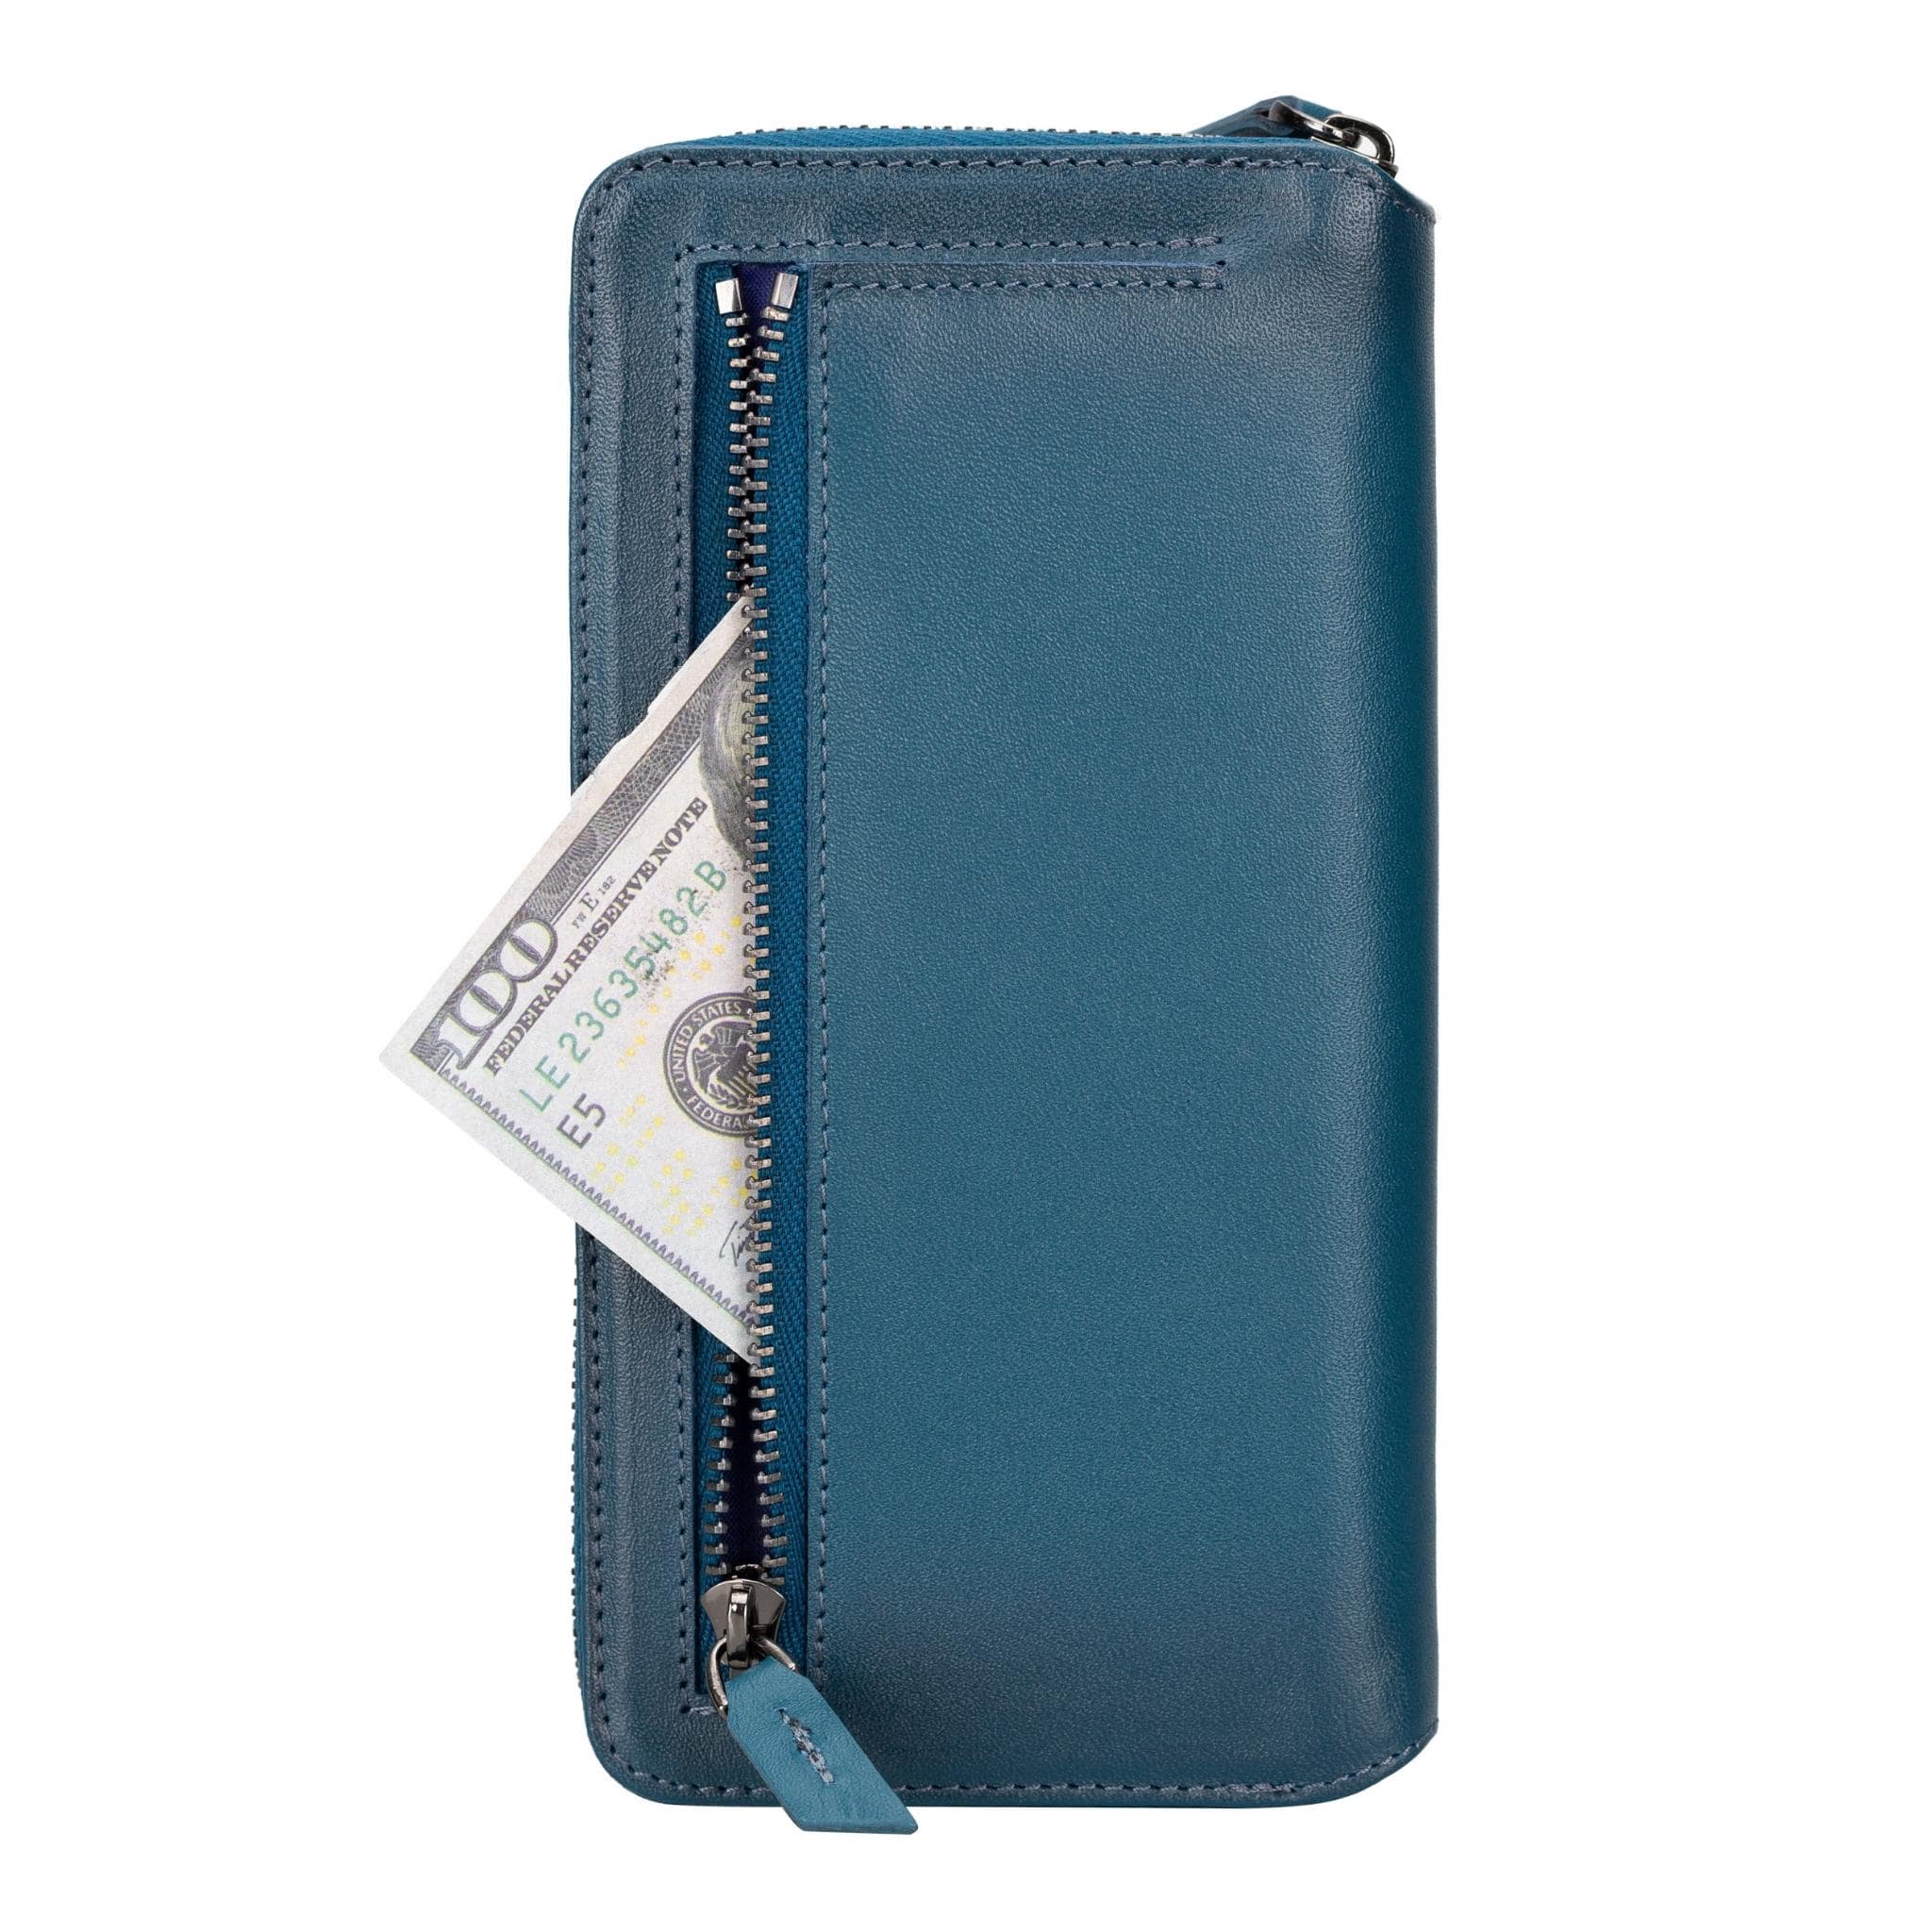 HoldingIT Leather Wallet Phone Case Compatible with iPhone 13 Models,  Travel Credit Card Holder and …See more HoldingIT Leather Wallet Phone Case